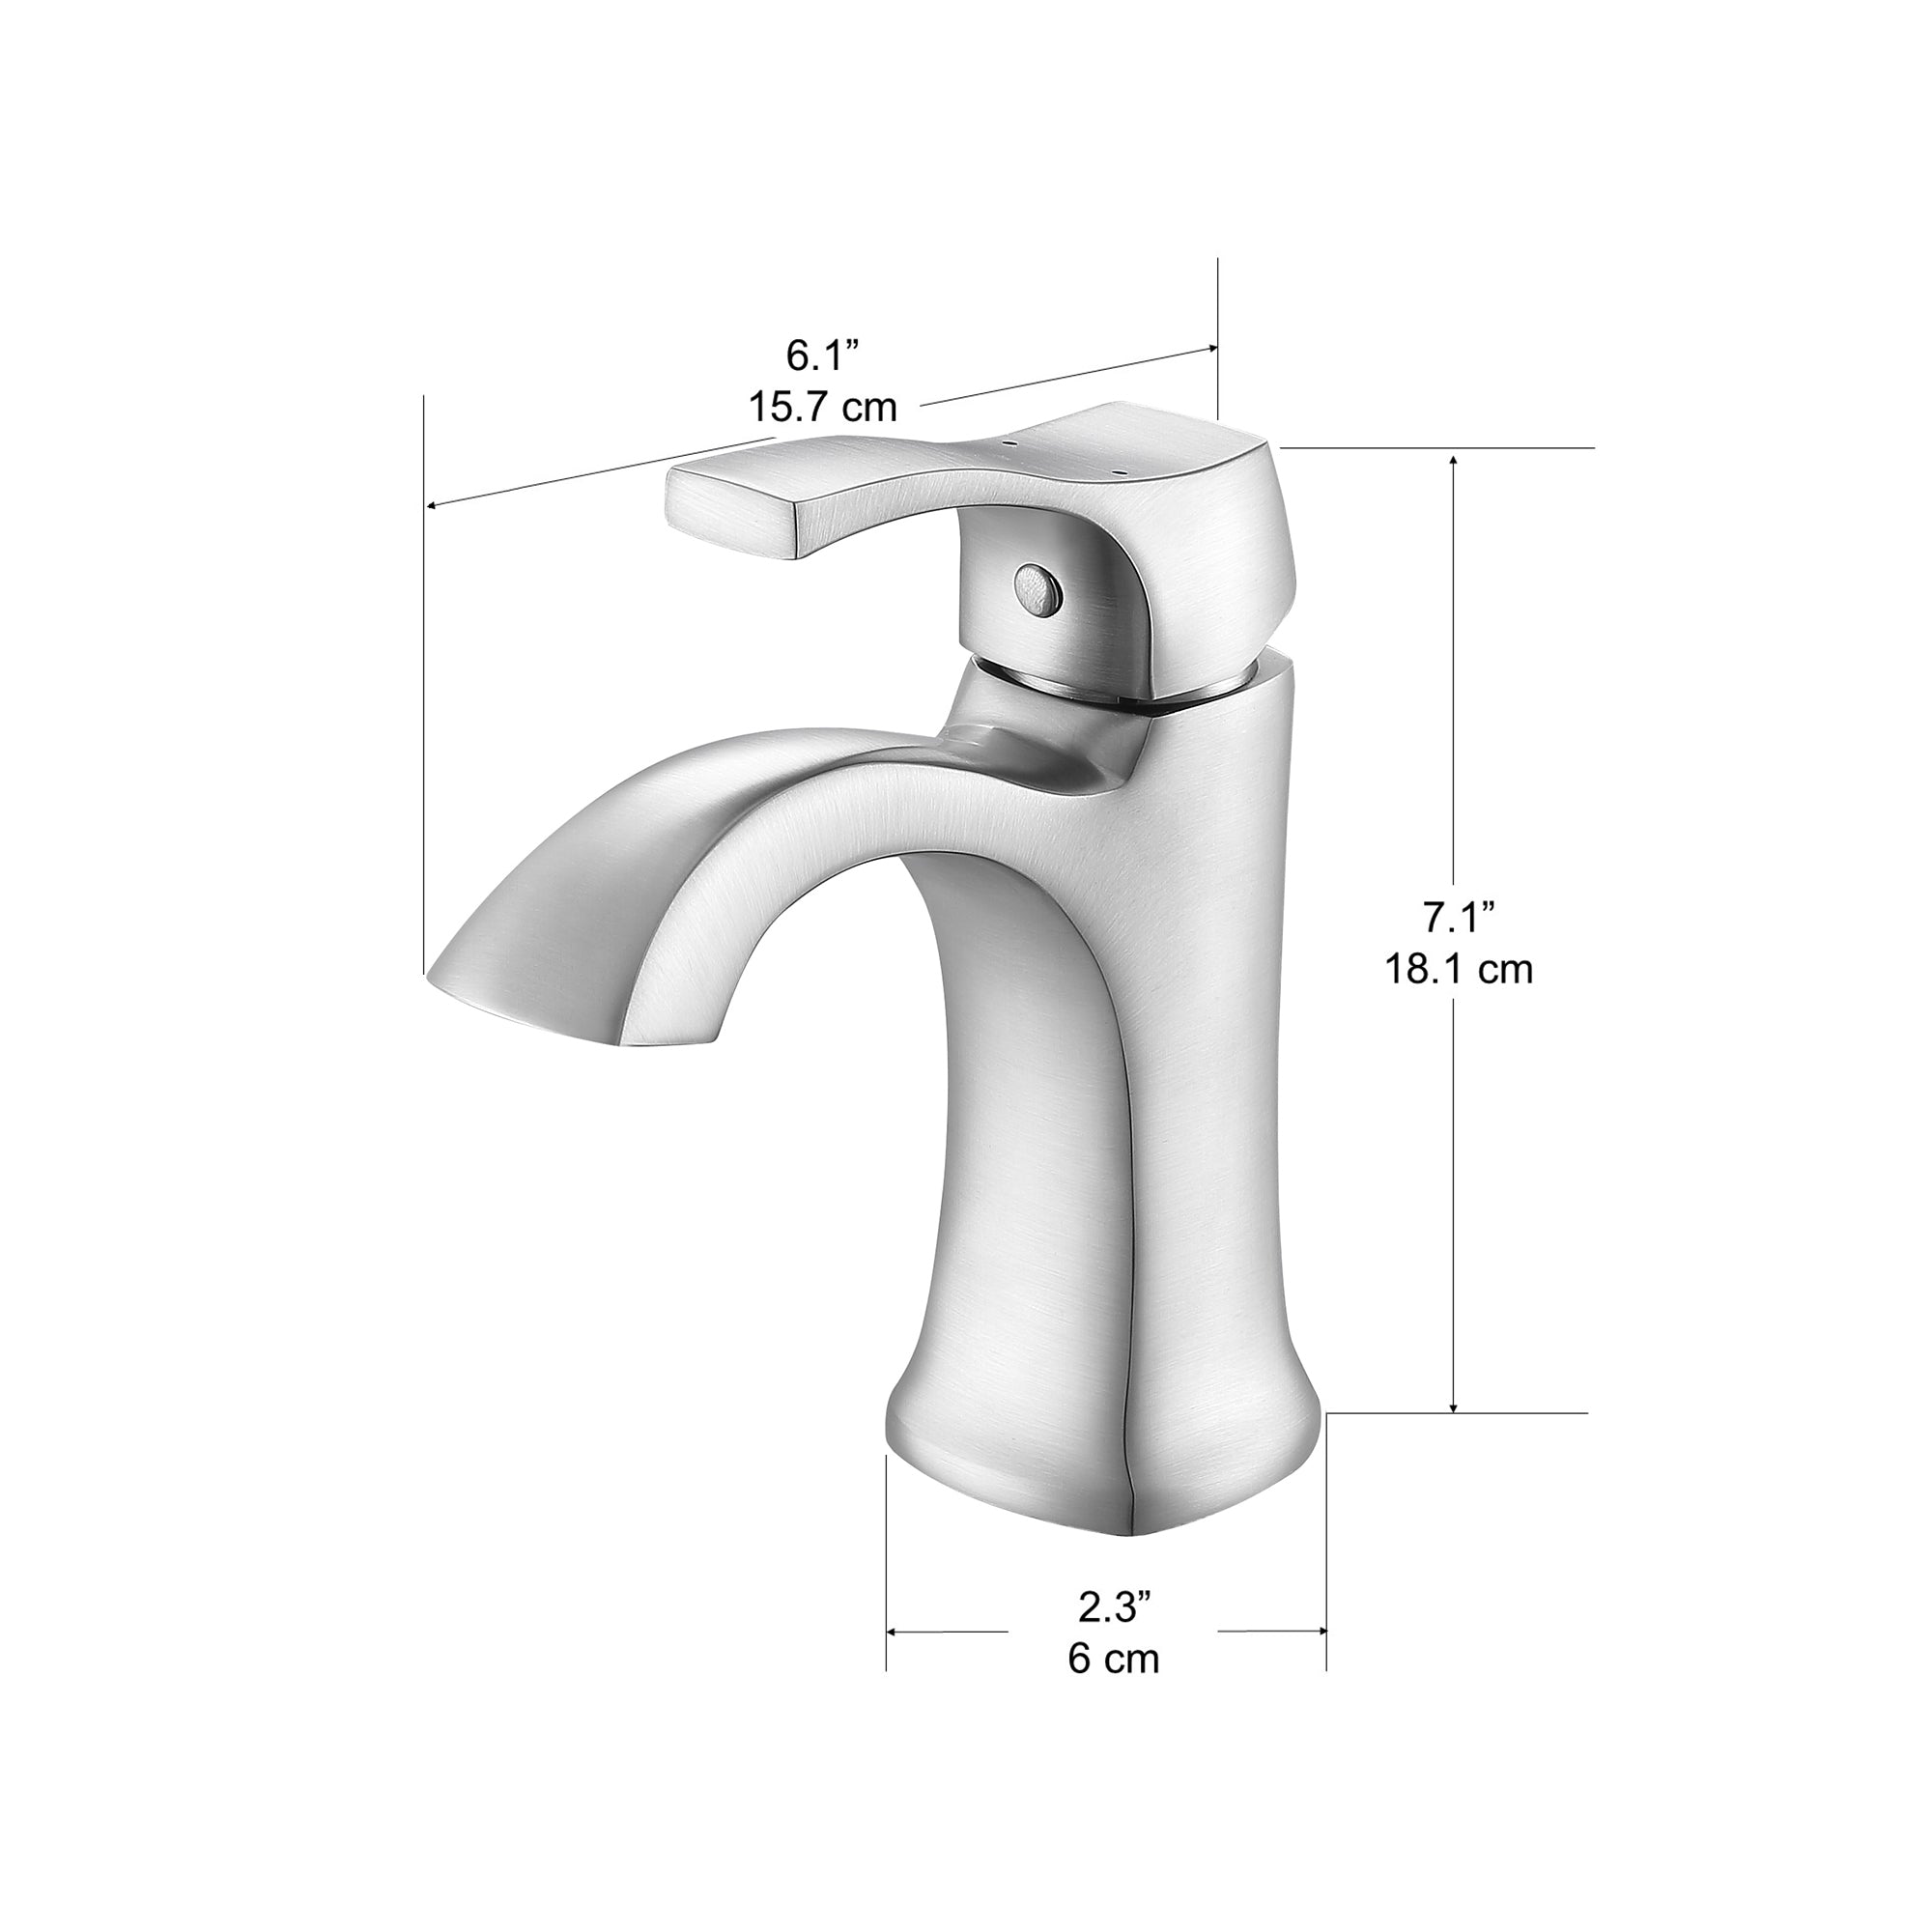 Ancona Morgan Single Lever 1-Hole Bathroom Faucet in Stainless Steel